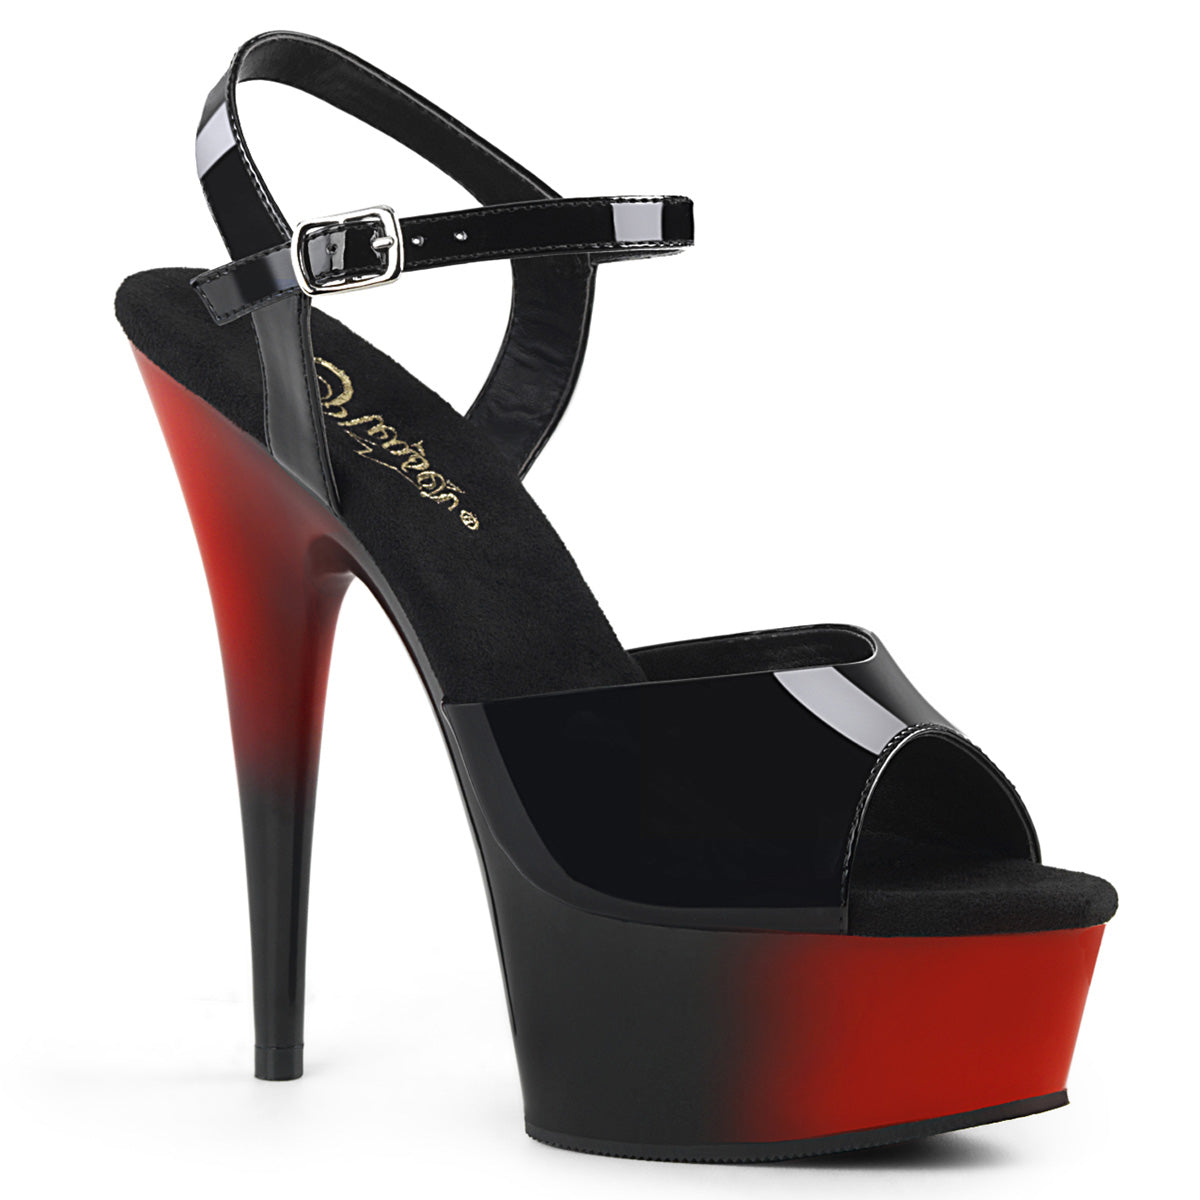 DELIGHT-609BR 6" Heel Black and Red Pole Dancing Platforms-Pleaser- Sexy Shoes